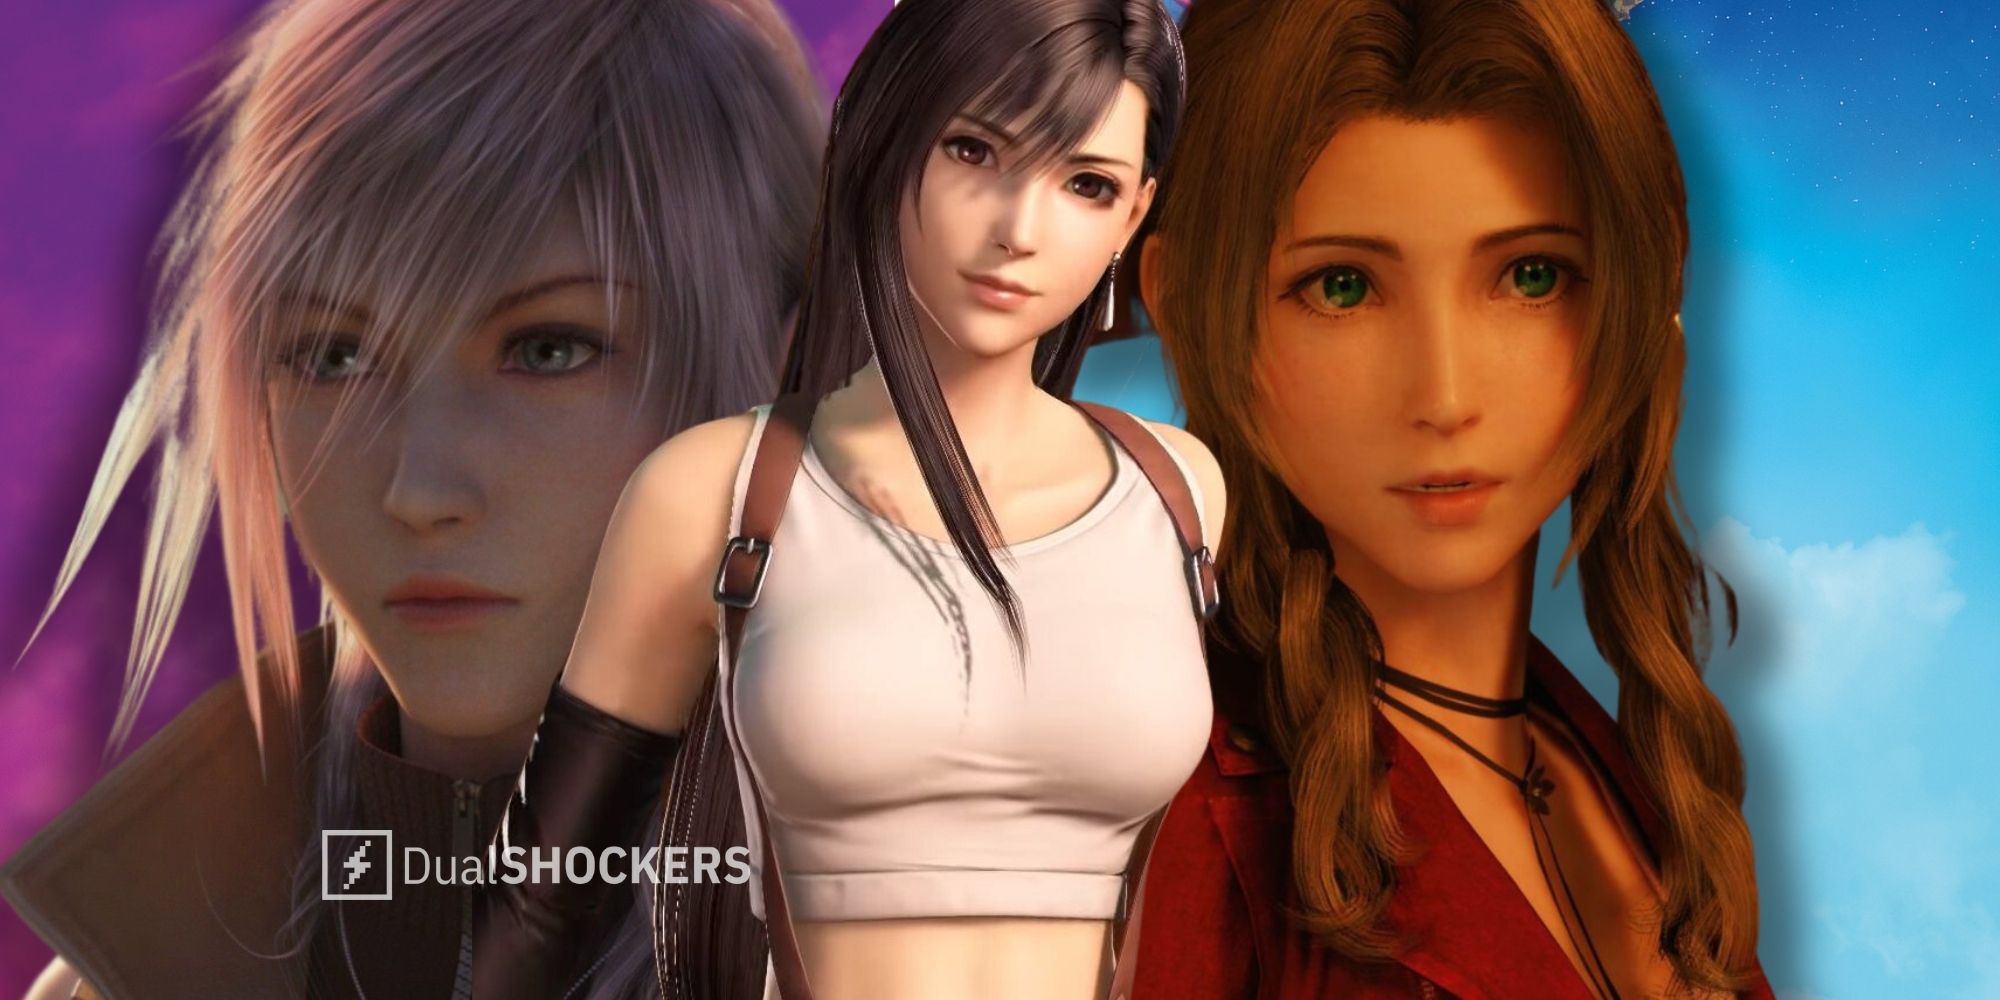 Final Fantasy female characters